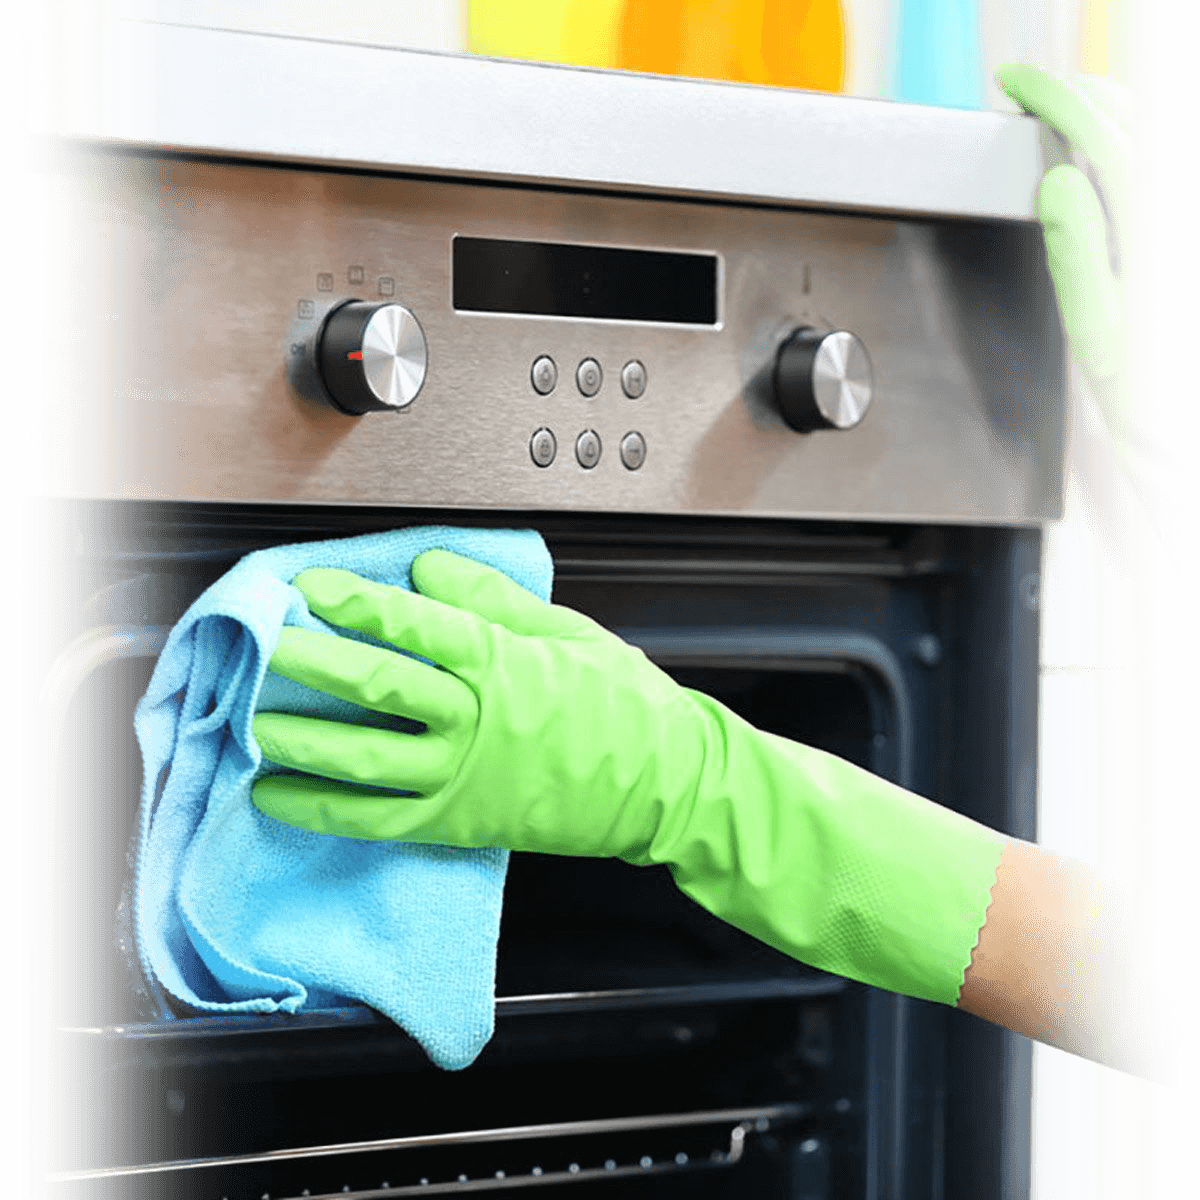 Oven Cleaning – Favourite Cleaning